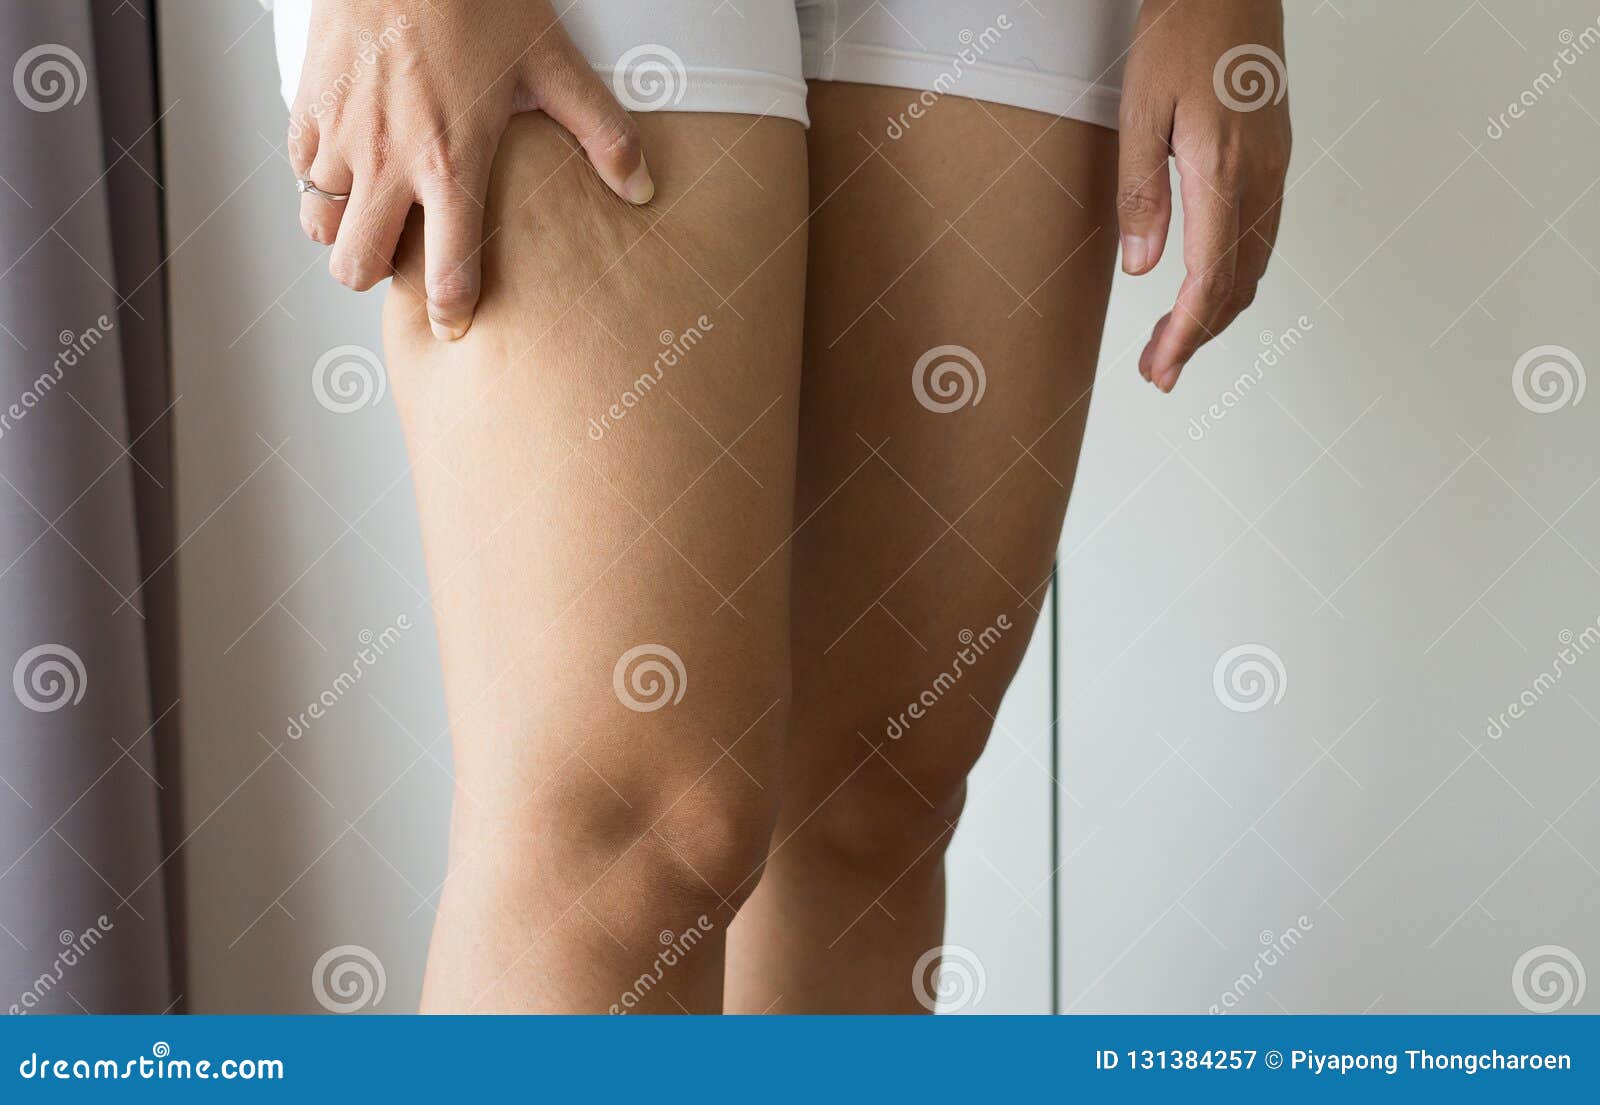 woman with cellulitis on leg excess and overweight fatty of female